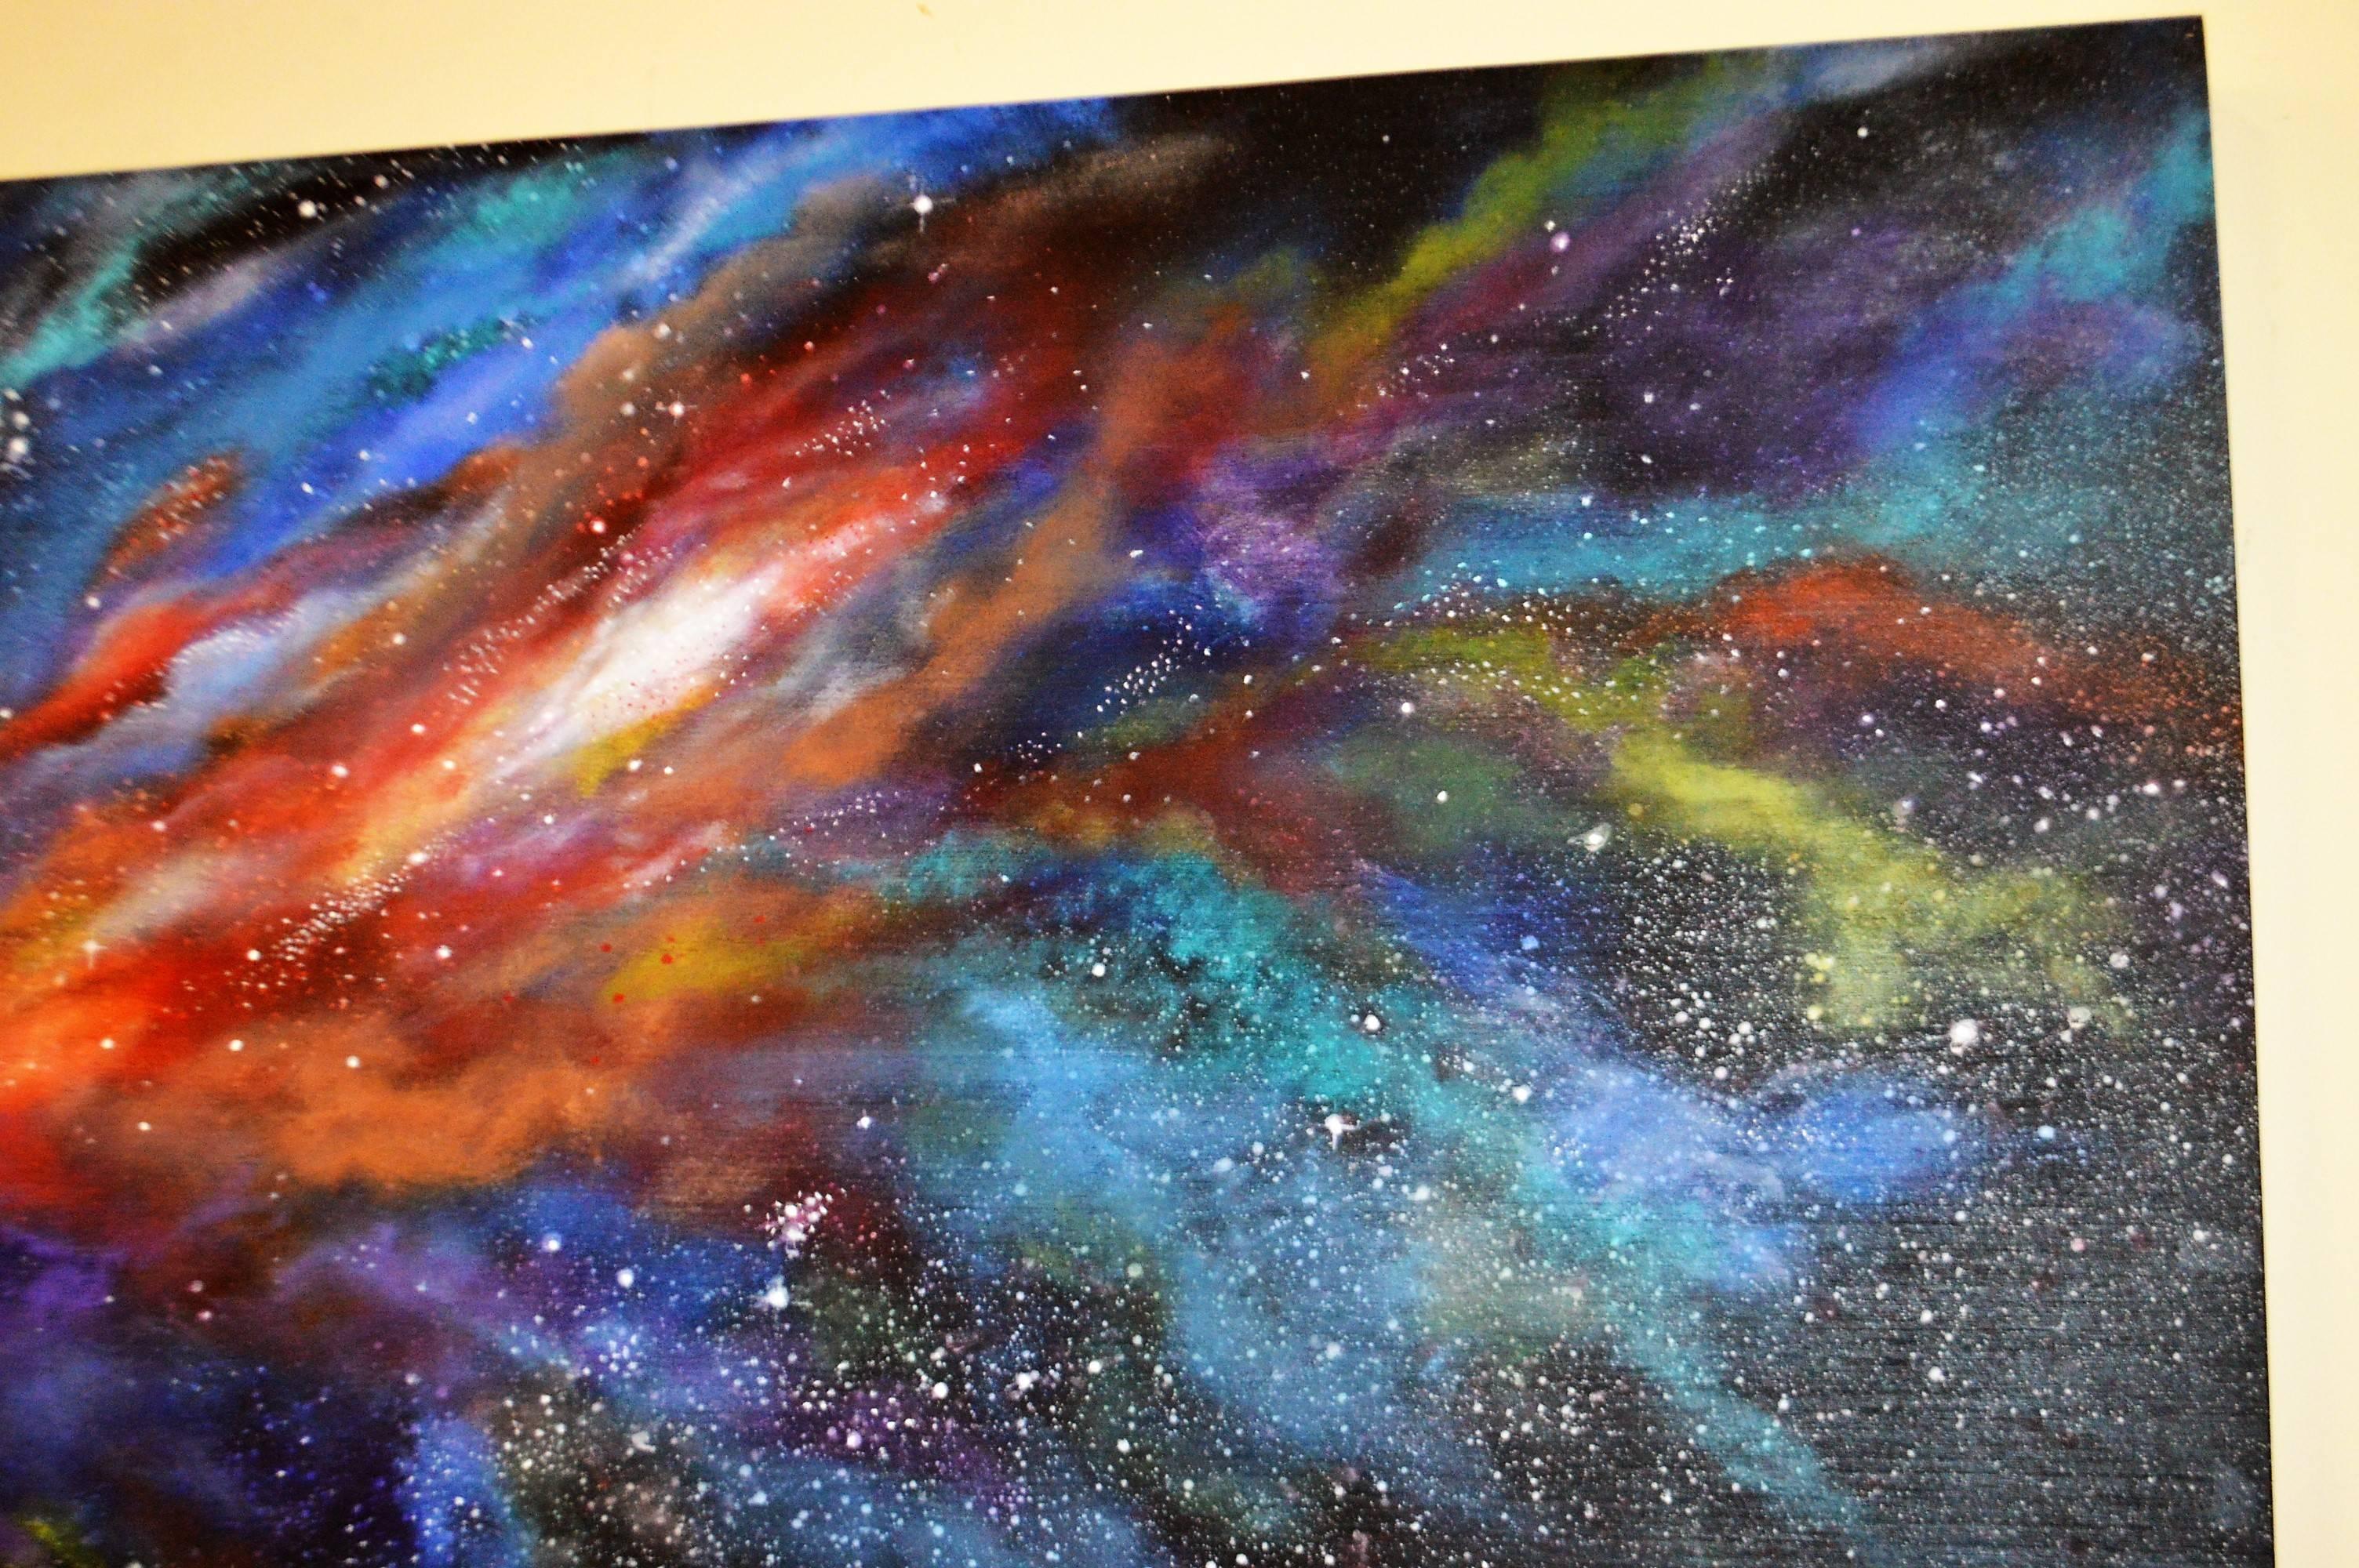 Acrylic on board executed from a photo #14718596 taken from the starry deep space nebula telescope. Painted by a local artist Greg Ryder.